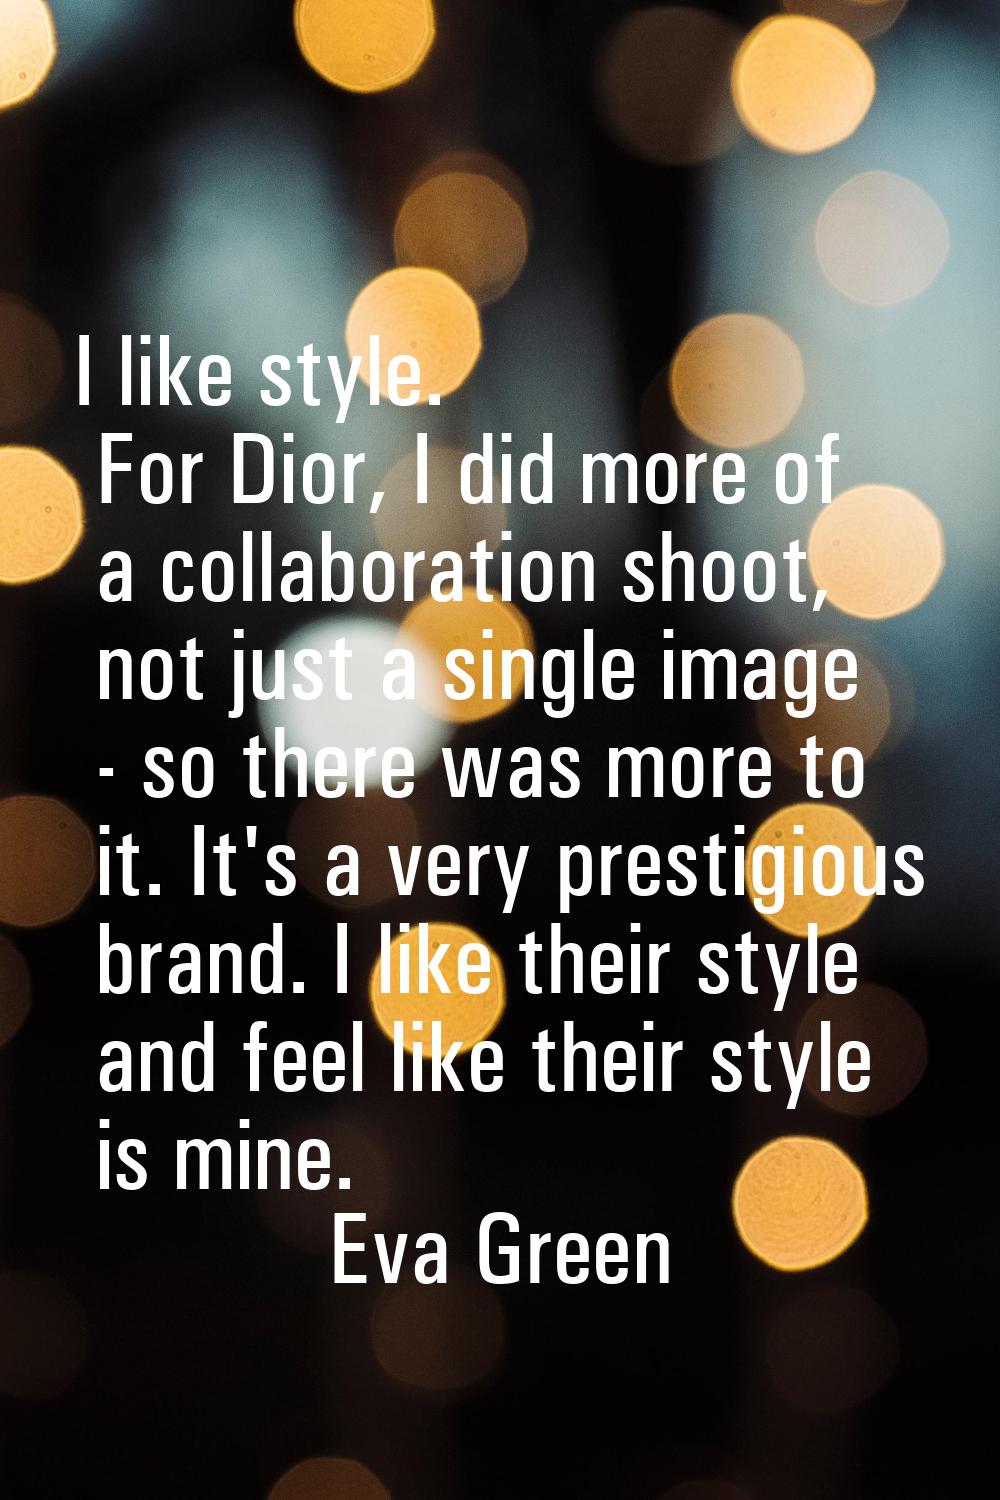 I like style. For Dior, I did more of a collaboration shoot, not just a single image - so there was